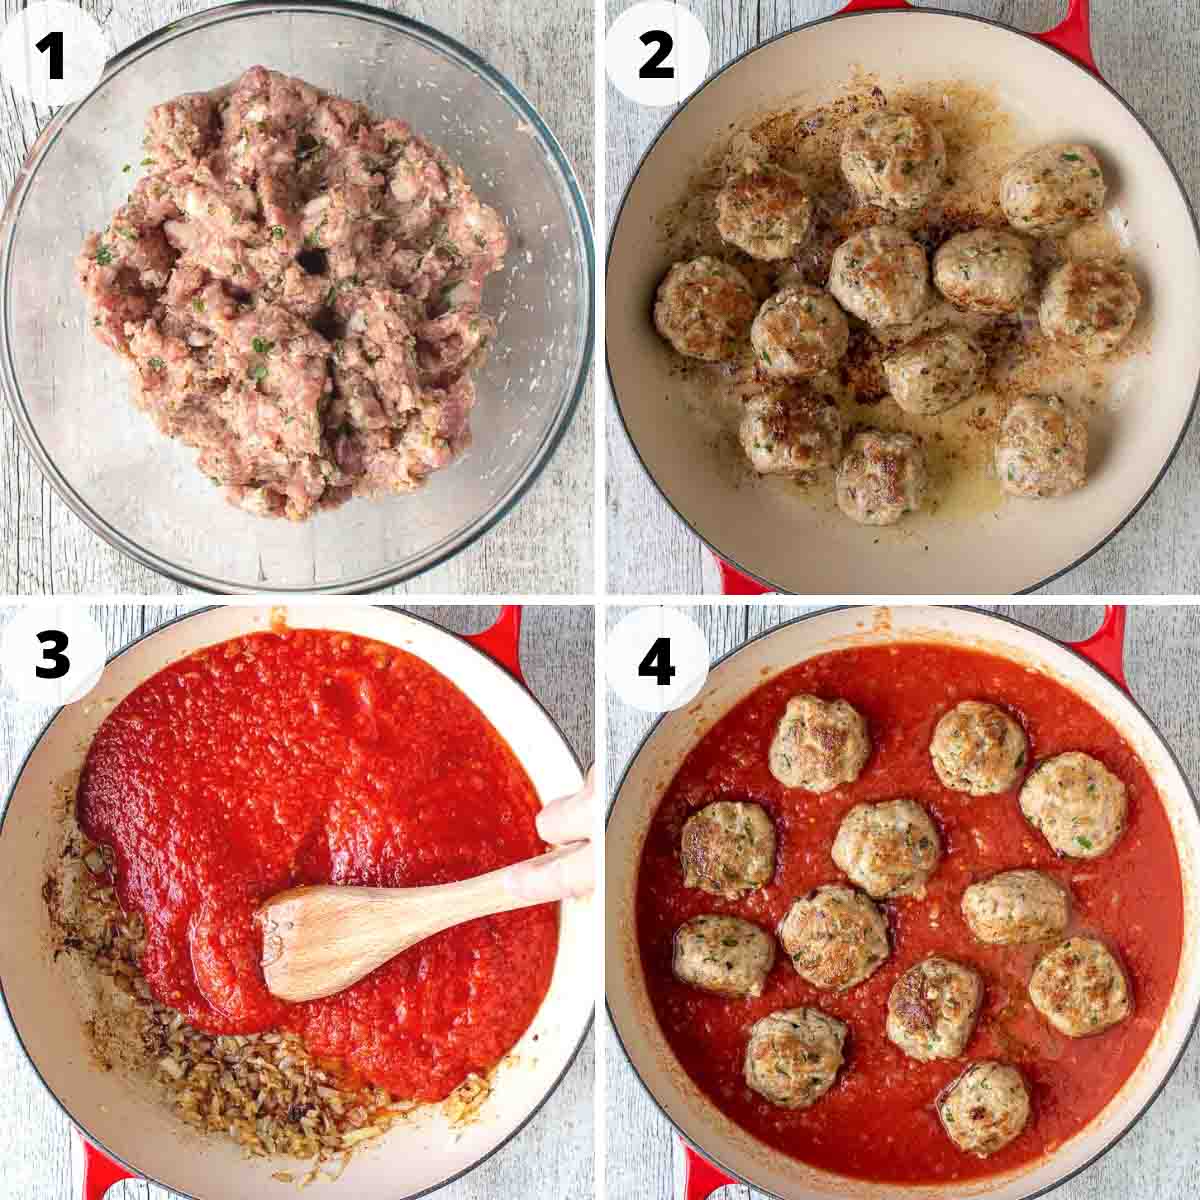 Four step process showing how to make this meatballs in sauce recipe.